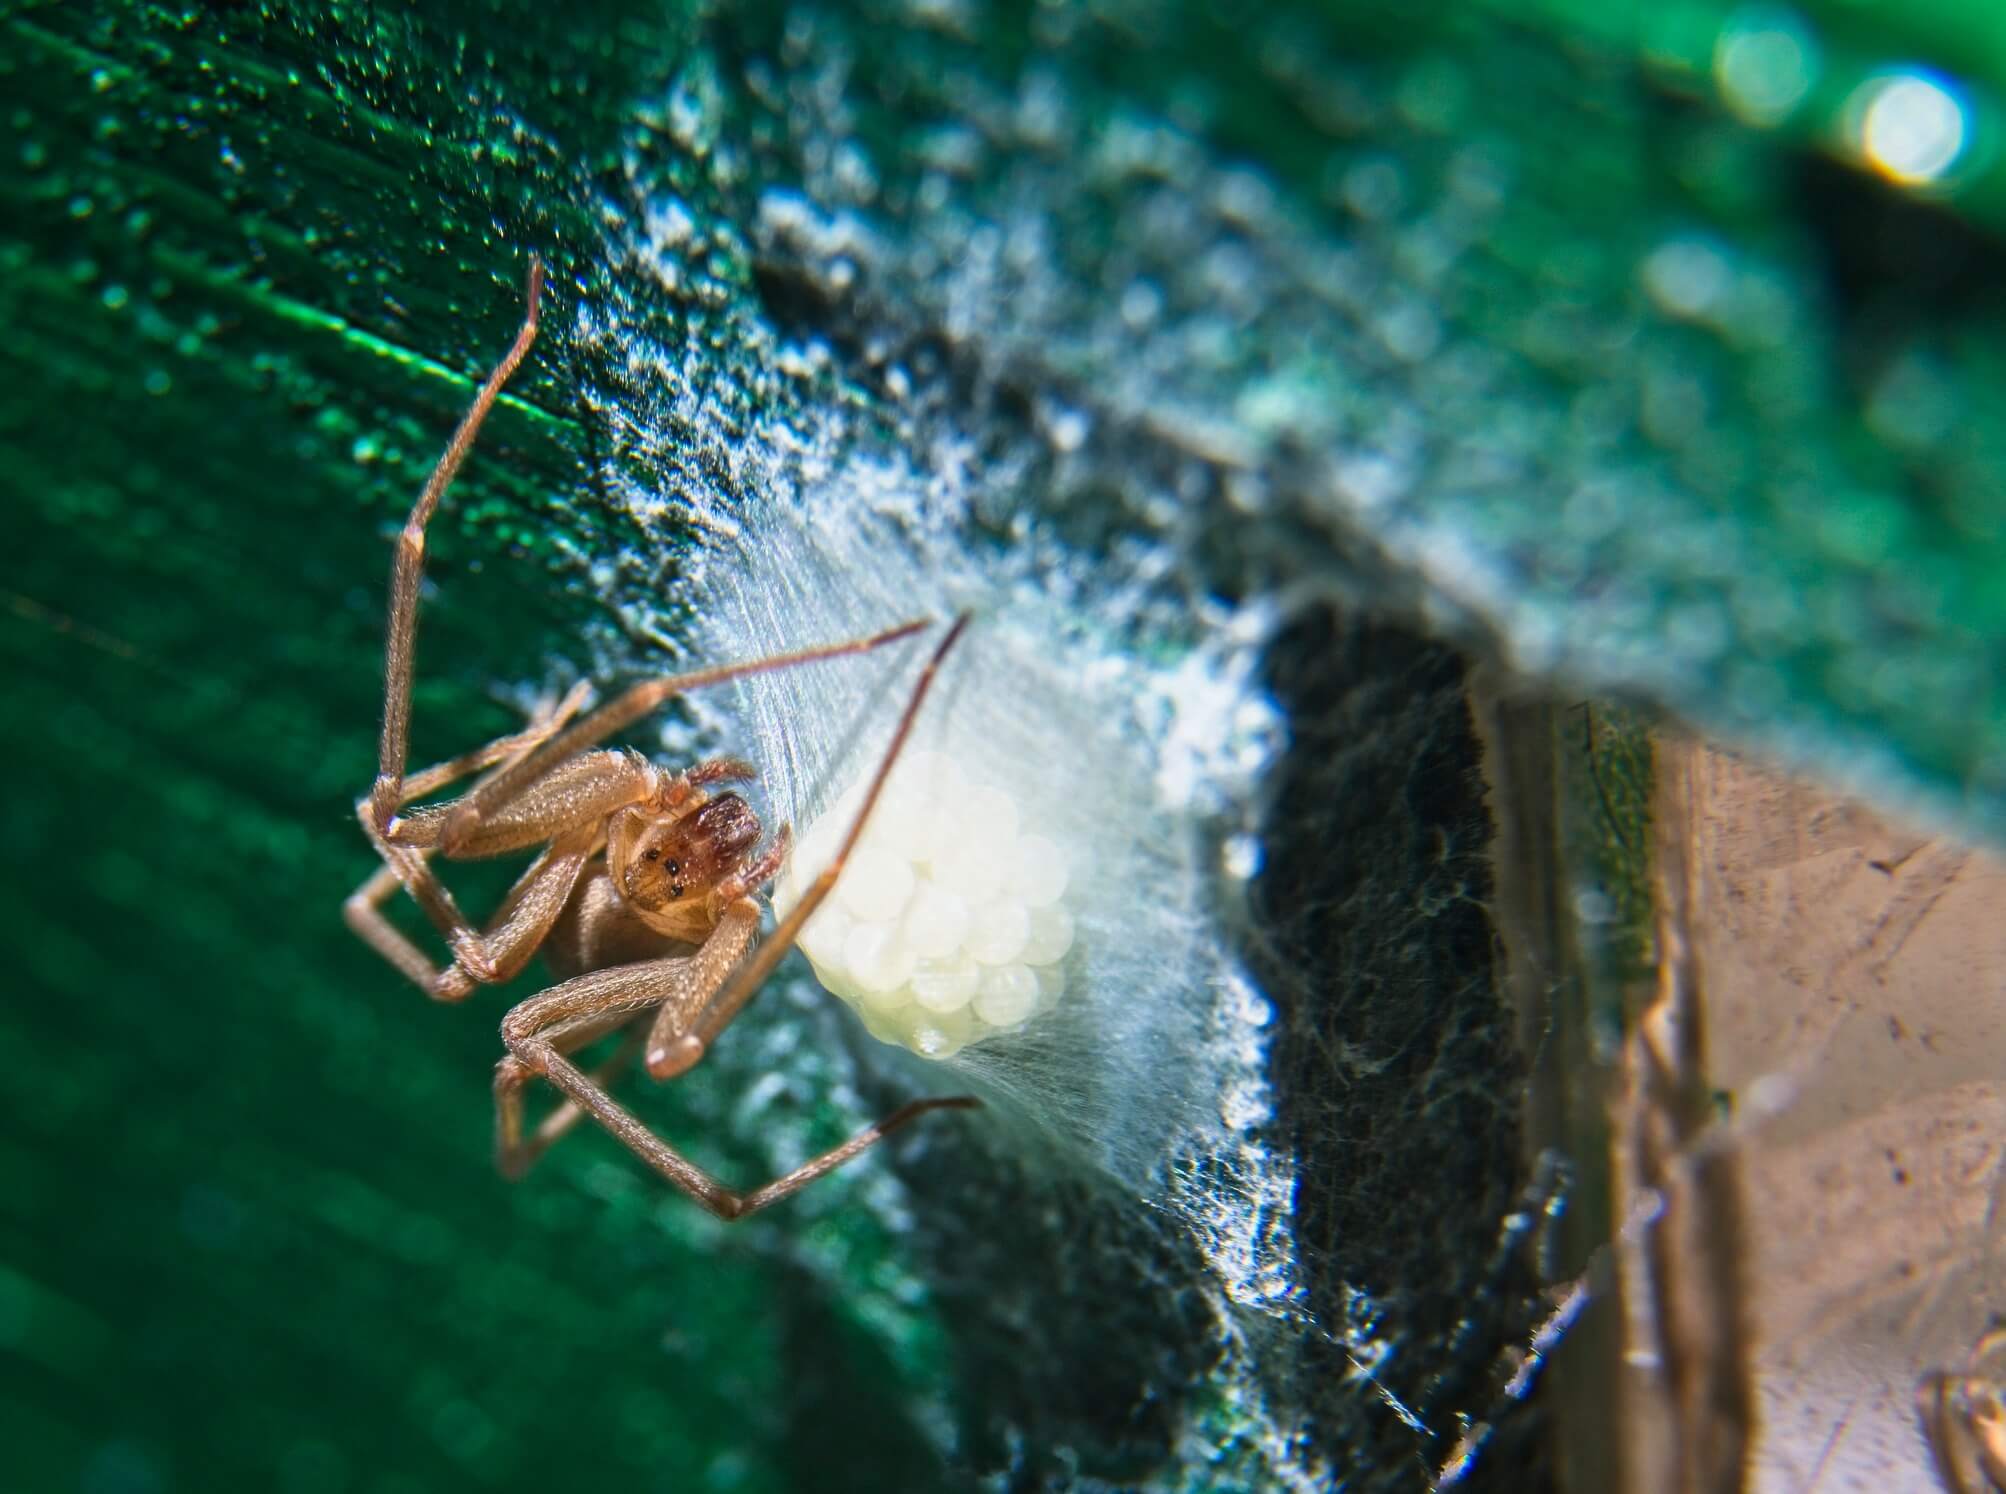 How to Identify and Treat a Brown Recluse Spider Bite